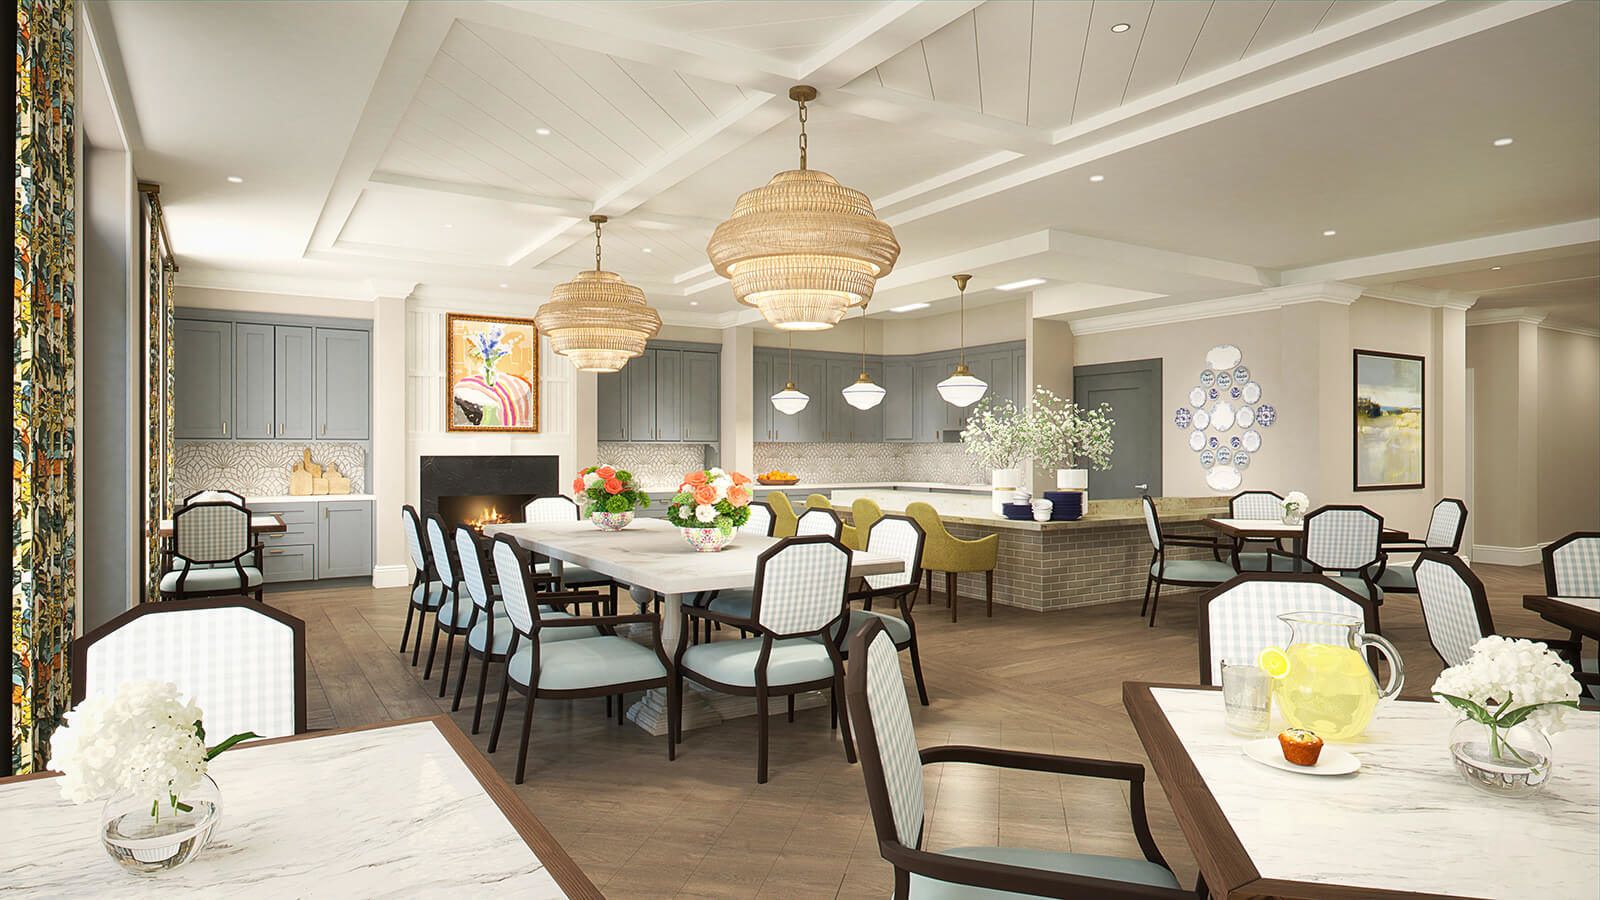 Interior view of Longleaf Liberty Park senior living community featuring dining area and decor.